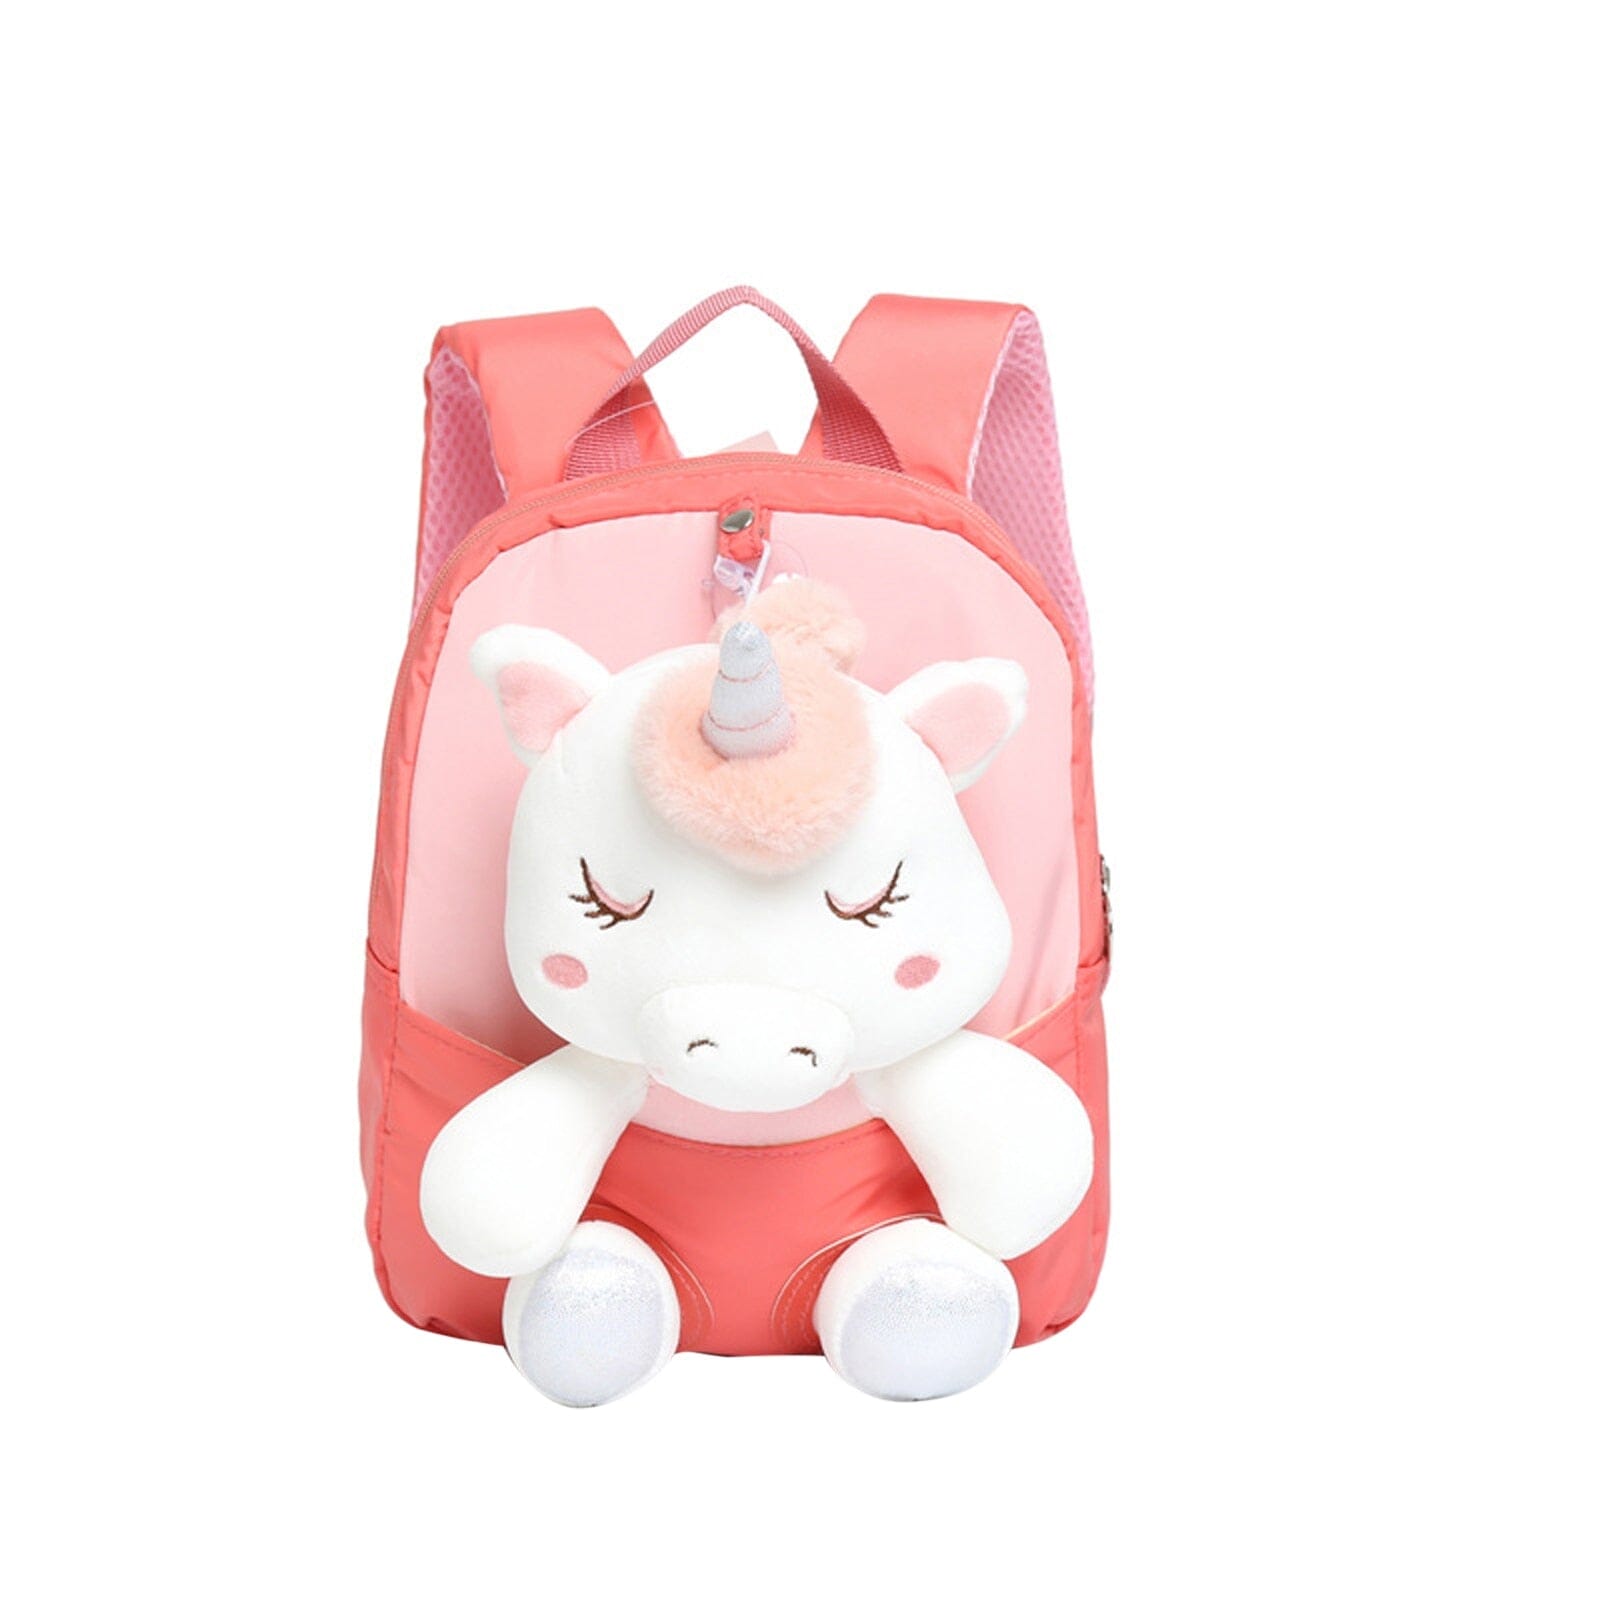 Unicorn Plush Backpack The Store Bags Watermelon red 